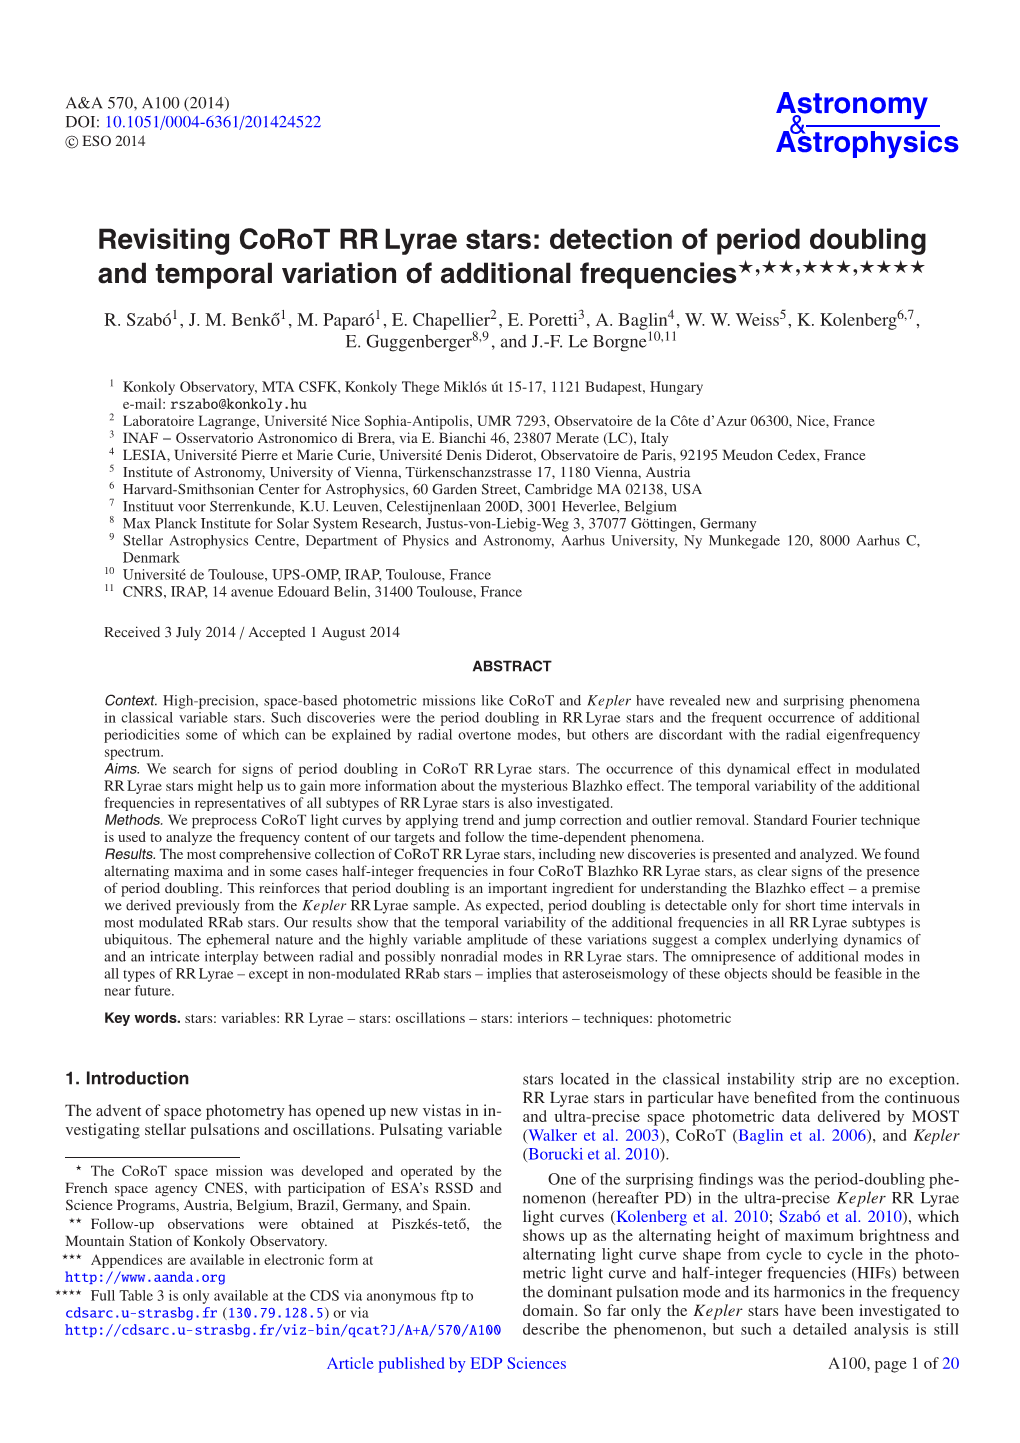 Revisiting Corot RR Lyrae Stars: Detection of Period Doubling and Temporal Variation of Additional Frequencies�,��,���,��